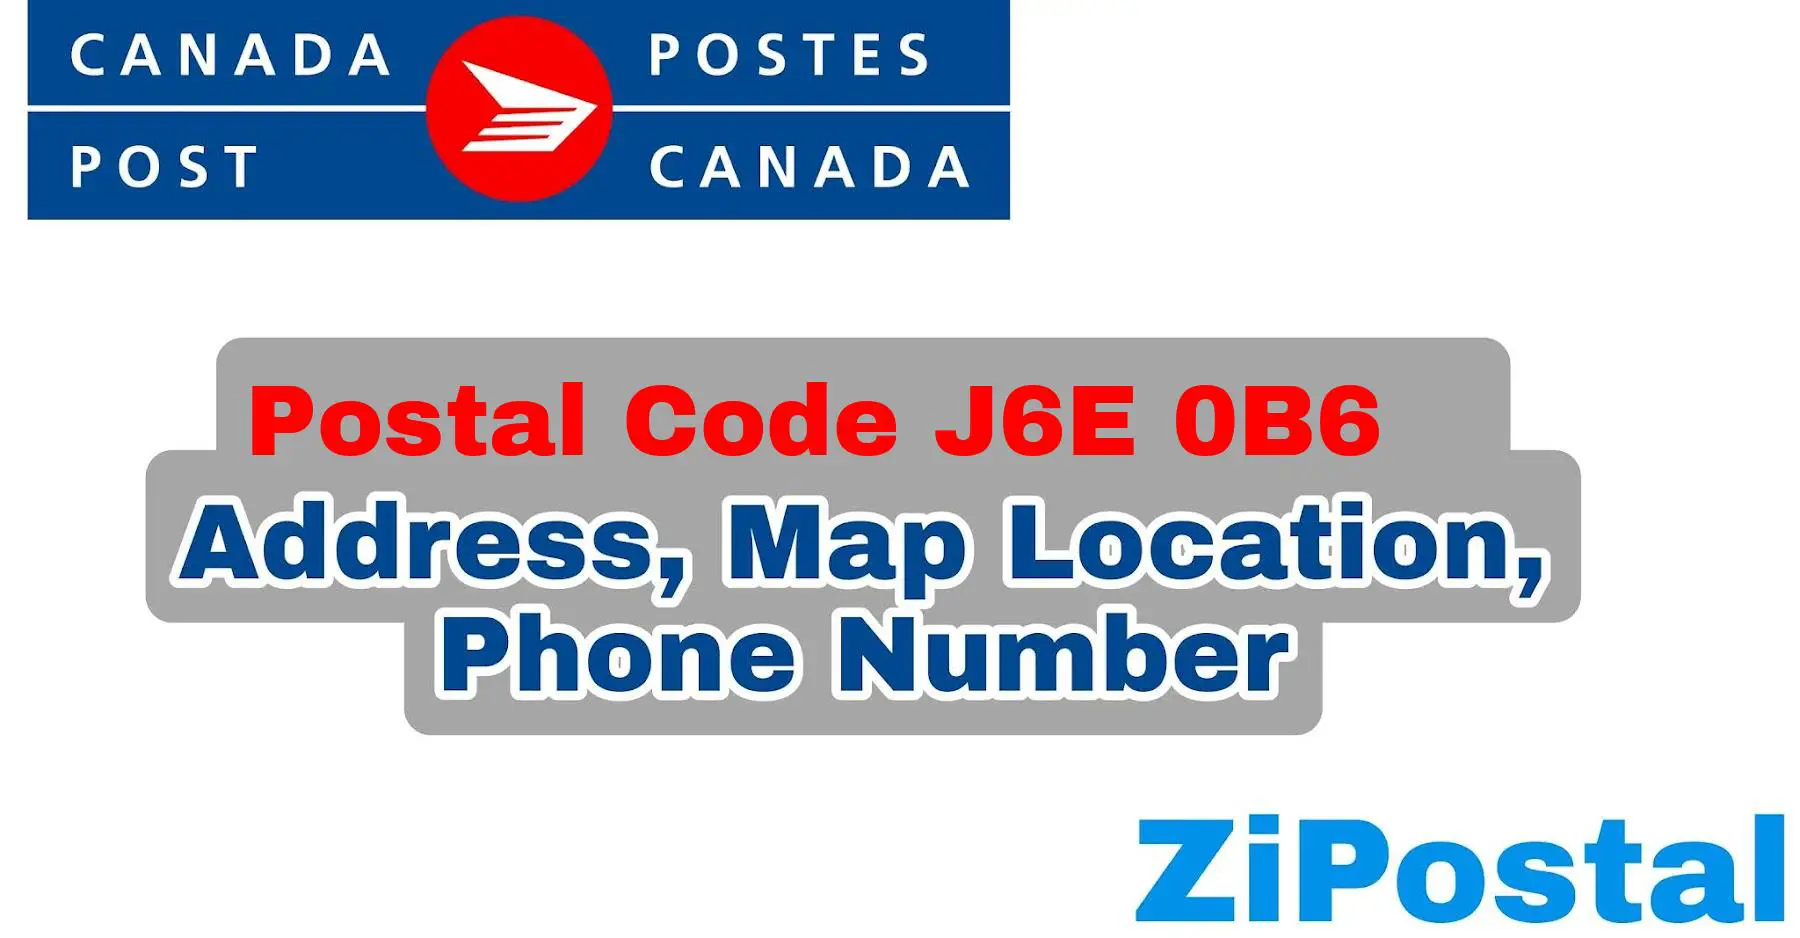 Postal Code J6E 0B6 Address Map Location and Phone Number